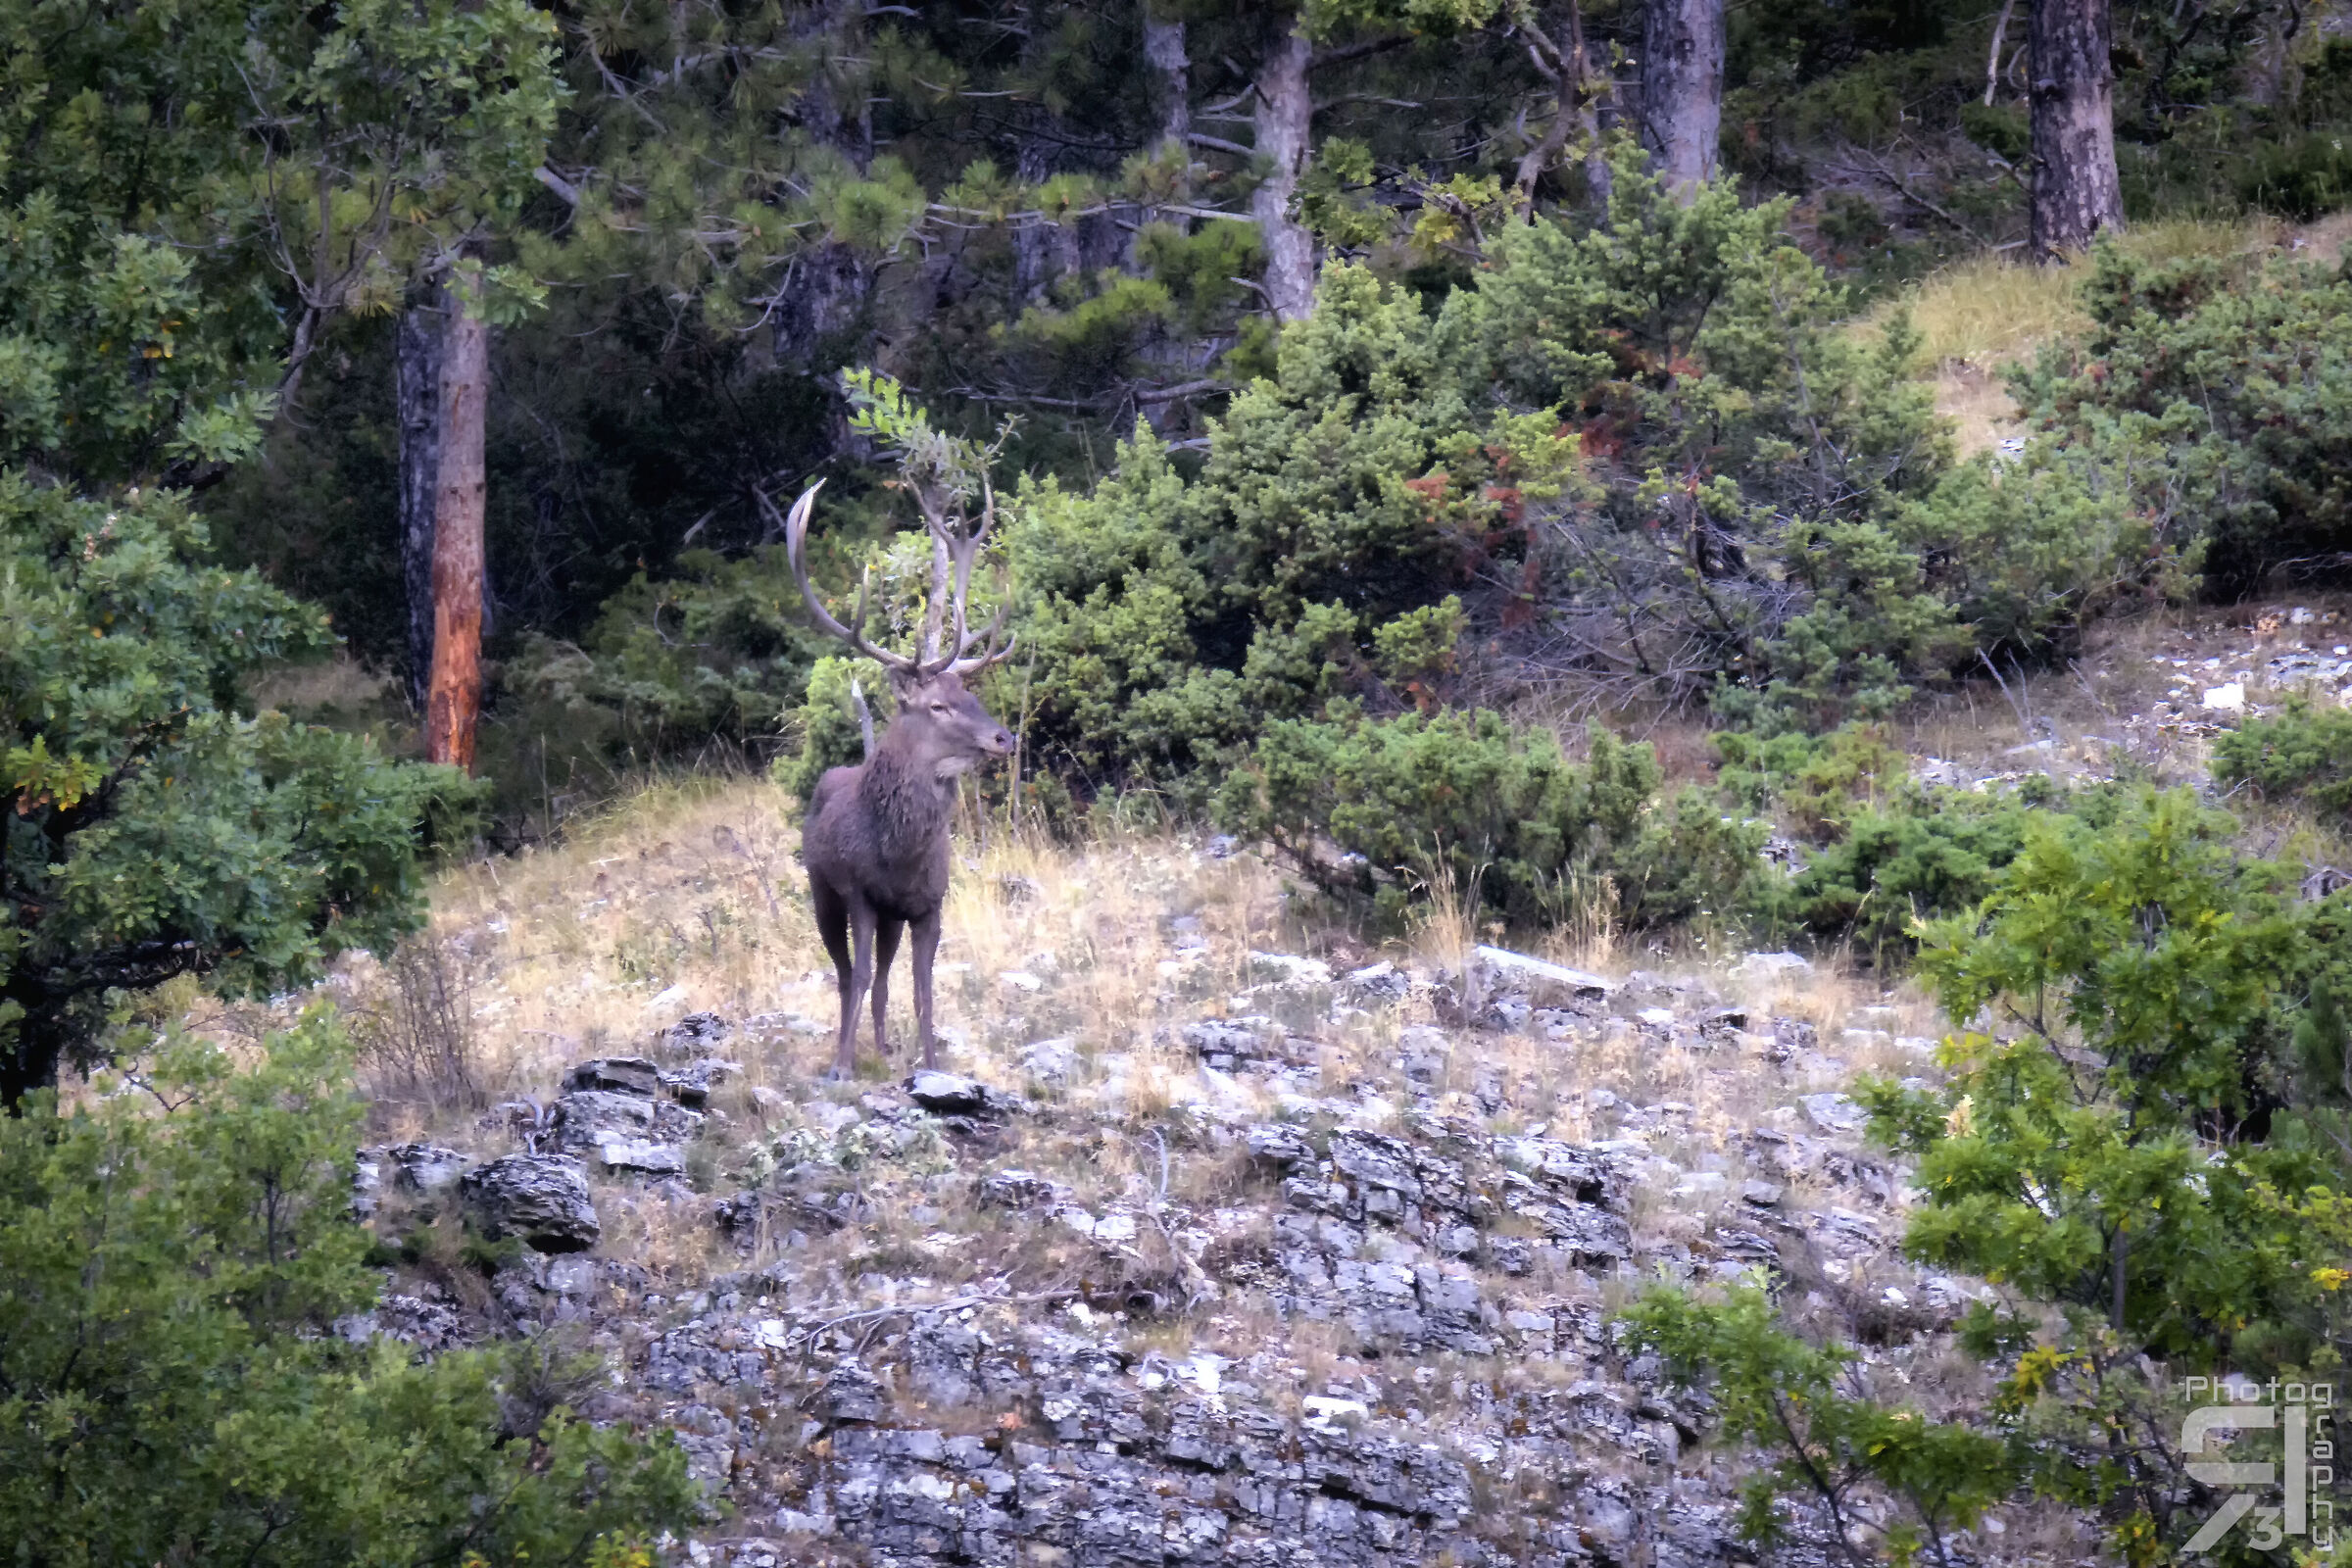 His Majesty the King of the Woods...